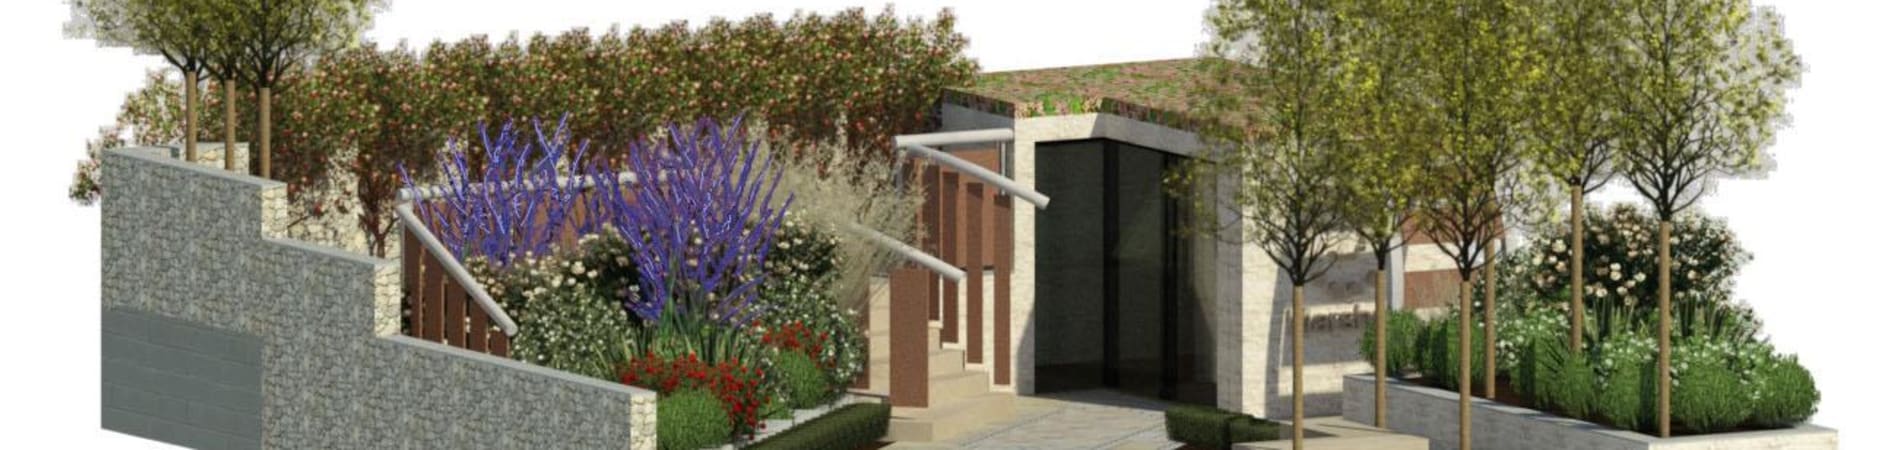 Marshalls unveils trade stand design for Chelsea Flower Show 2019